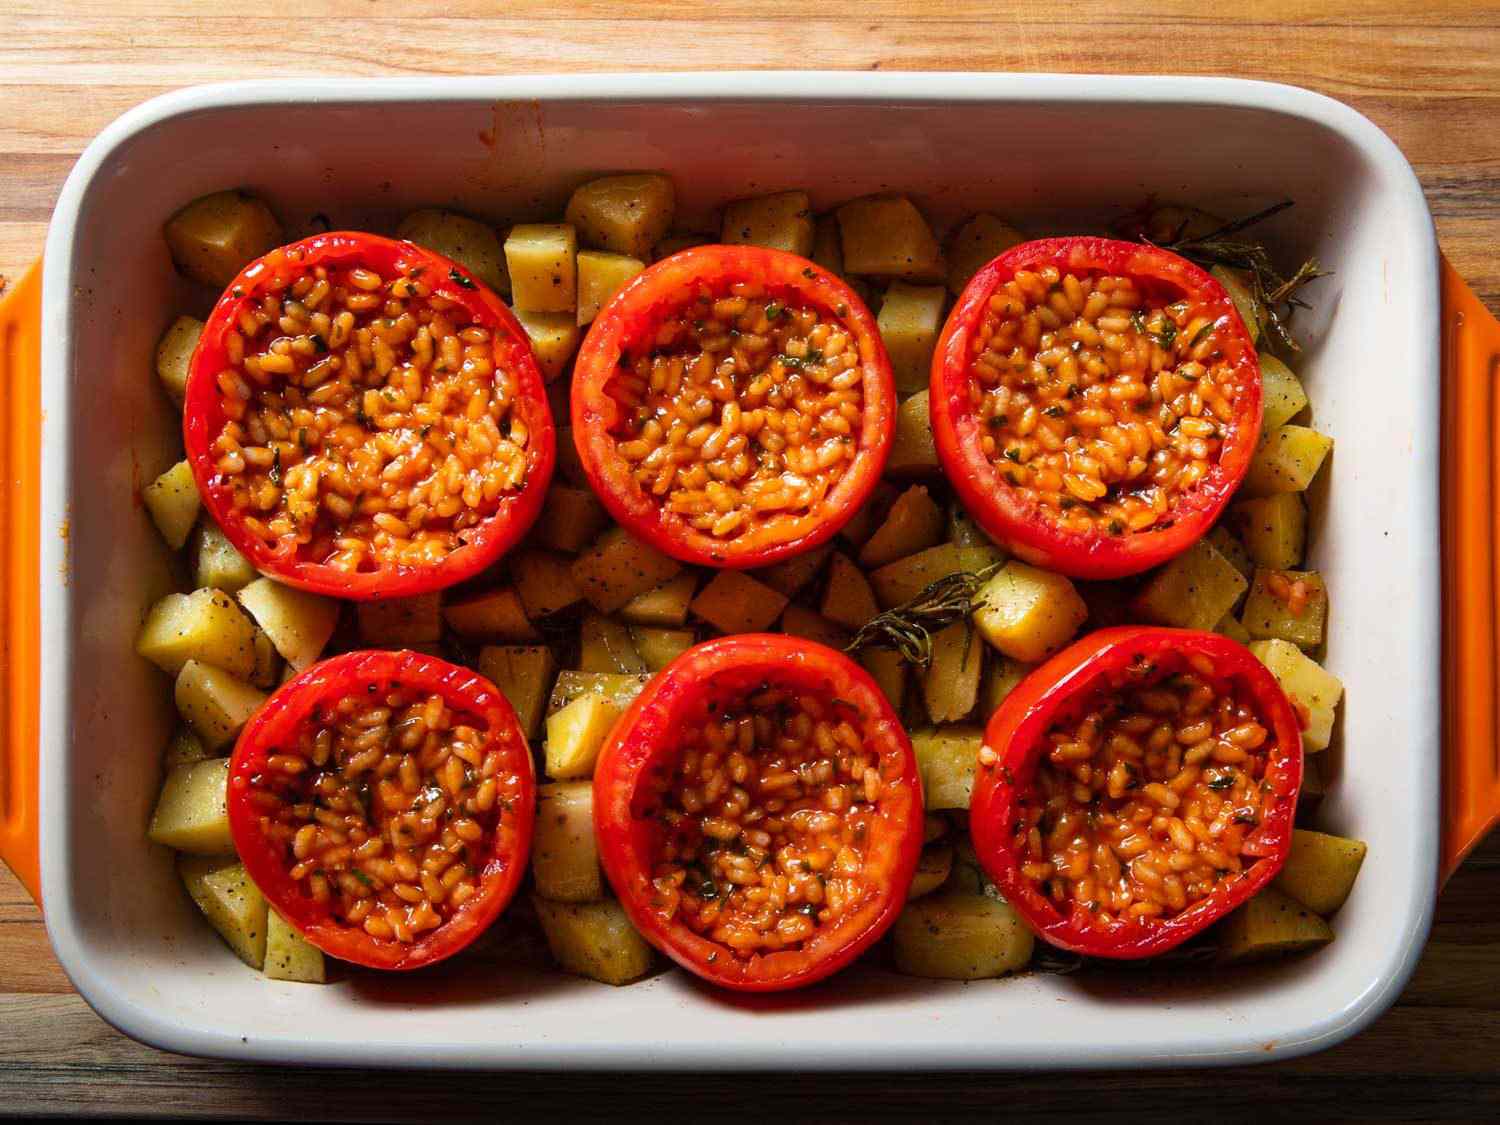 Overhead of rice-stuffed tomatoes in a baking dish with potatoes before being roasted.